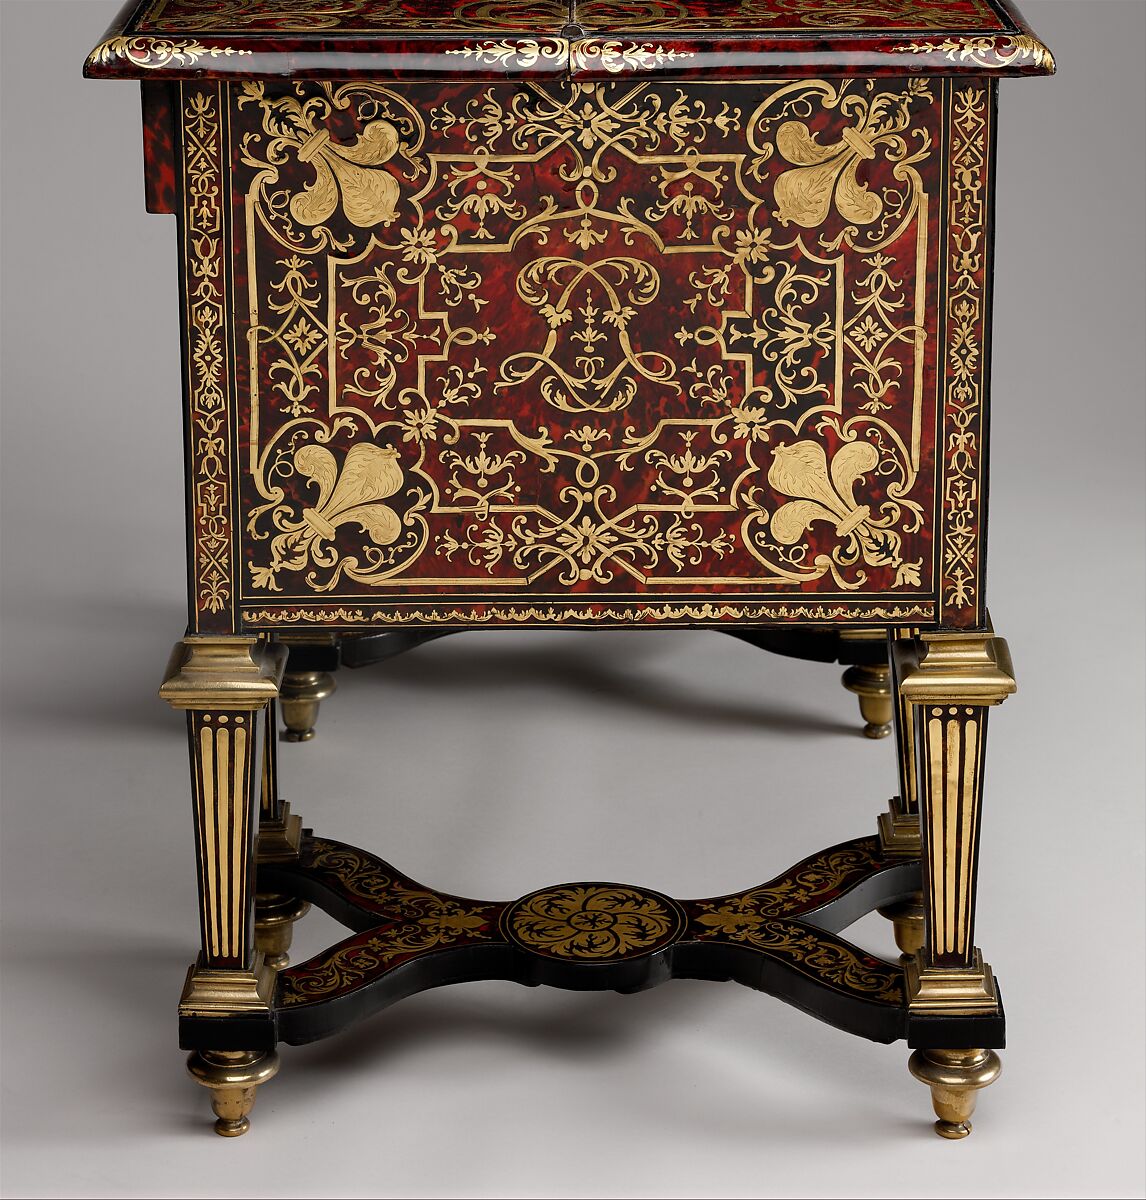 Small desk with folding top (bureau brisé), Marquetry by Alexandre-Jean Oppenordt (Dutch, 1639–1715, active France), Oak, pine, walnut veneered with ebony, rosewood, and marquetry of tortoiseshell and engraved brass; gilt bronze and steel, French, Paris 